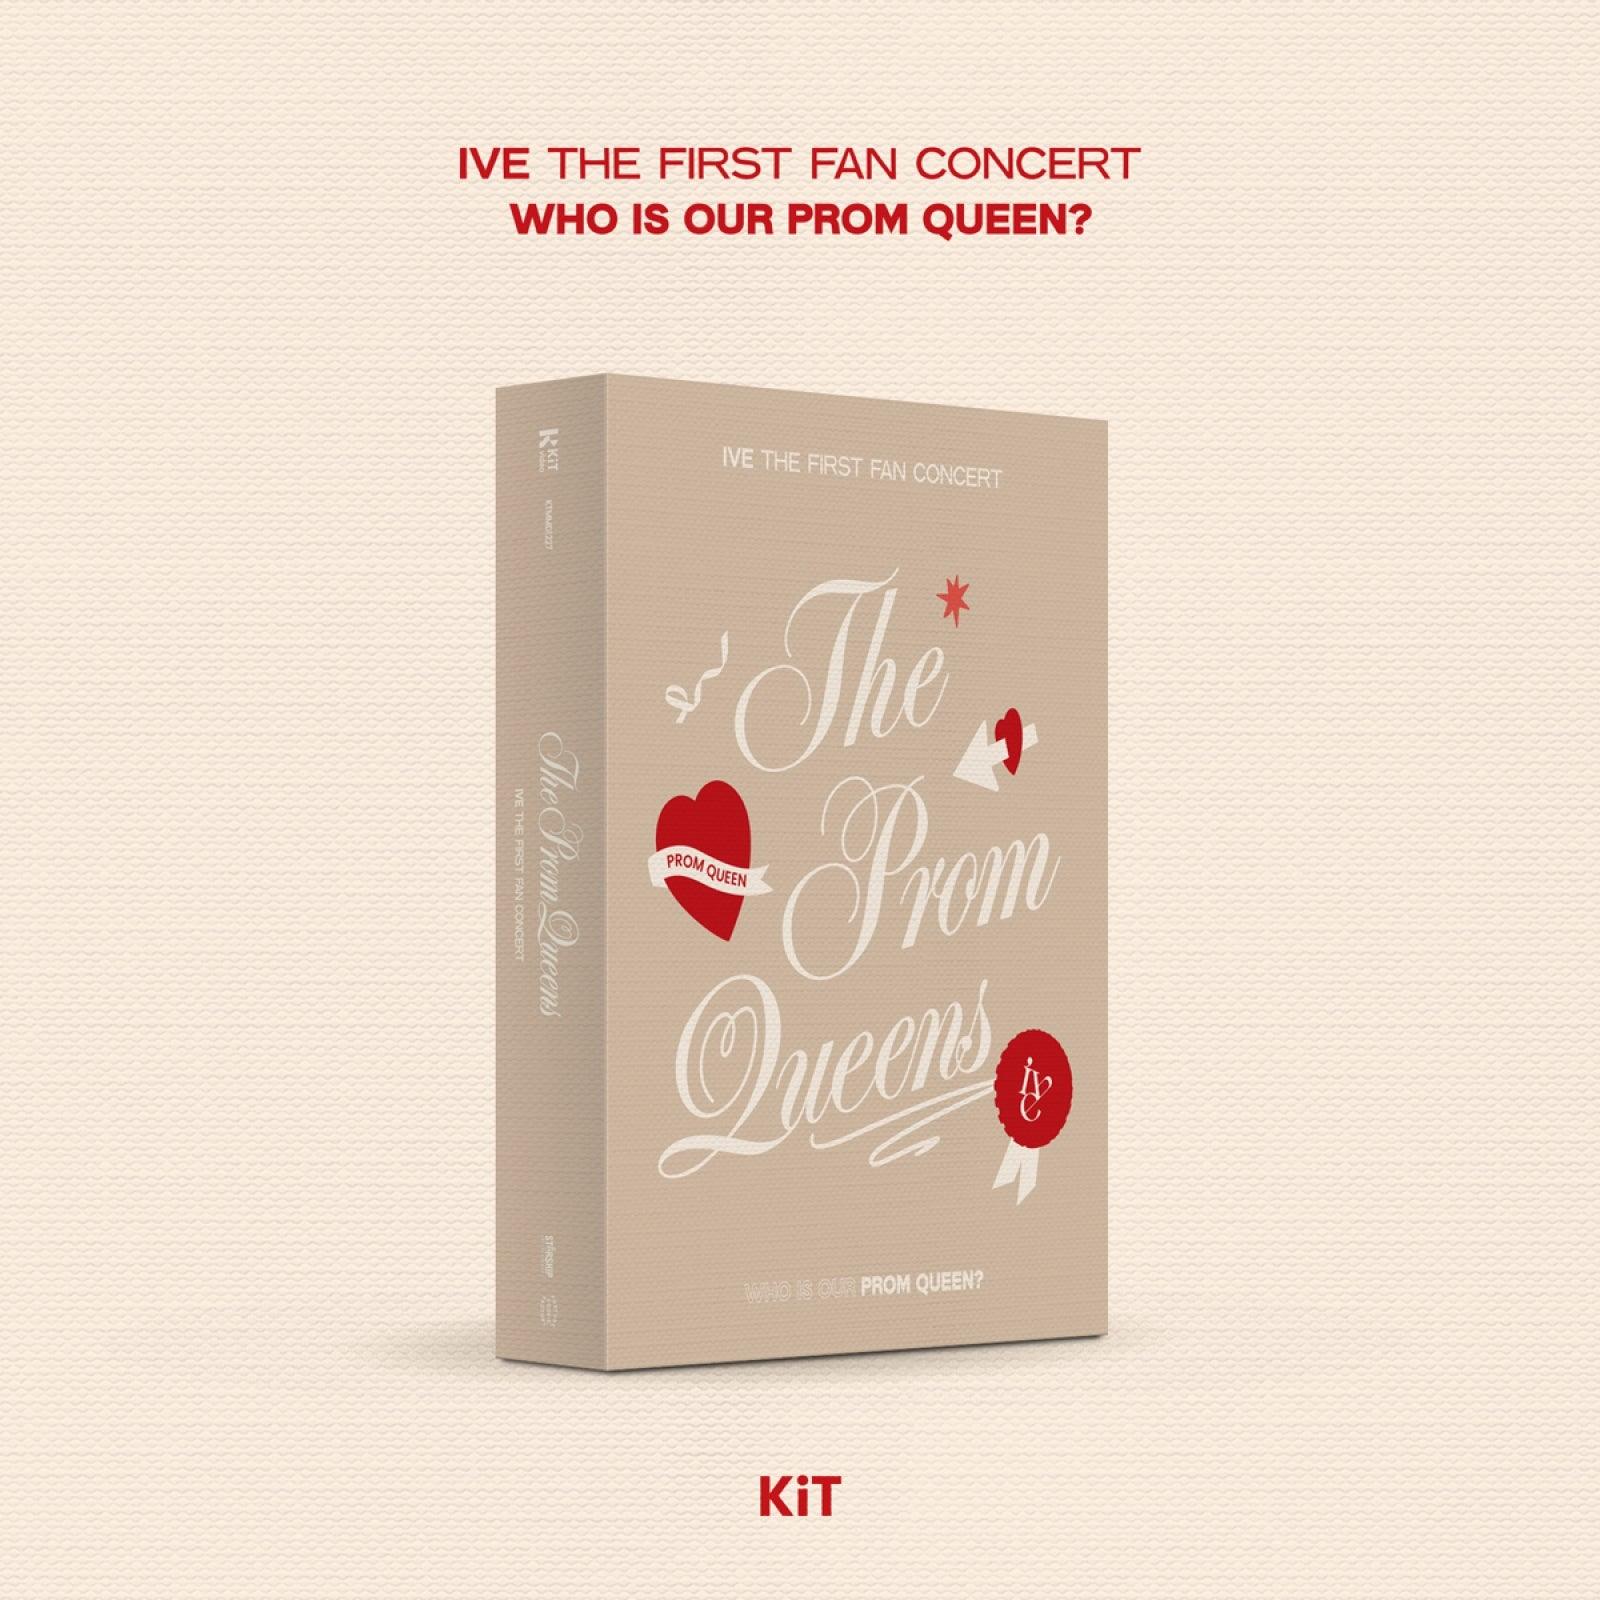 [PRE-ORER] IVE THE FIRST FAN CONCERT KiT VIDEO - Shopping Around the World with Goodsnjoy